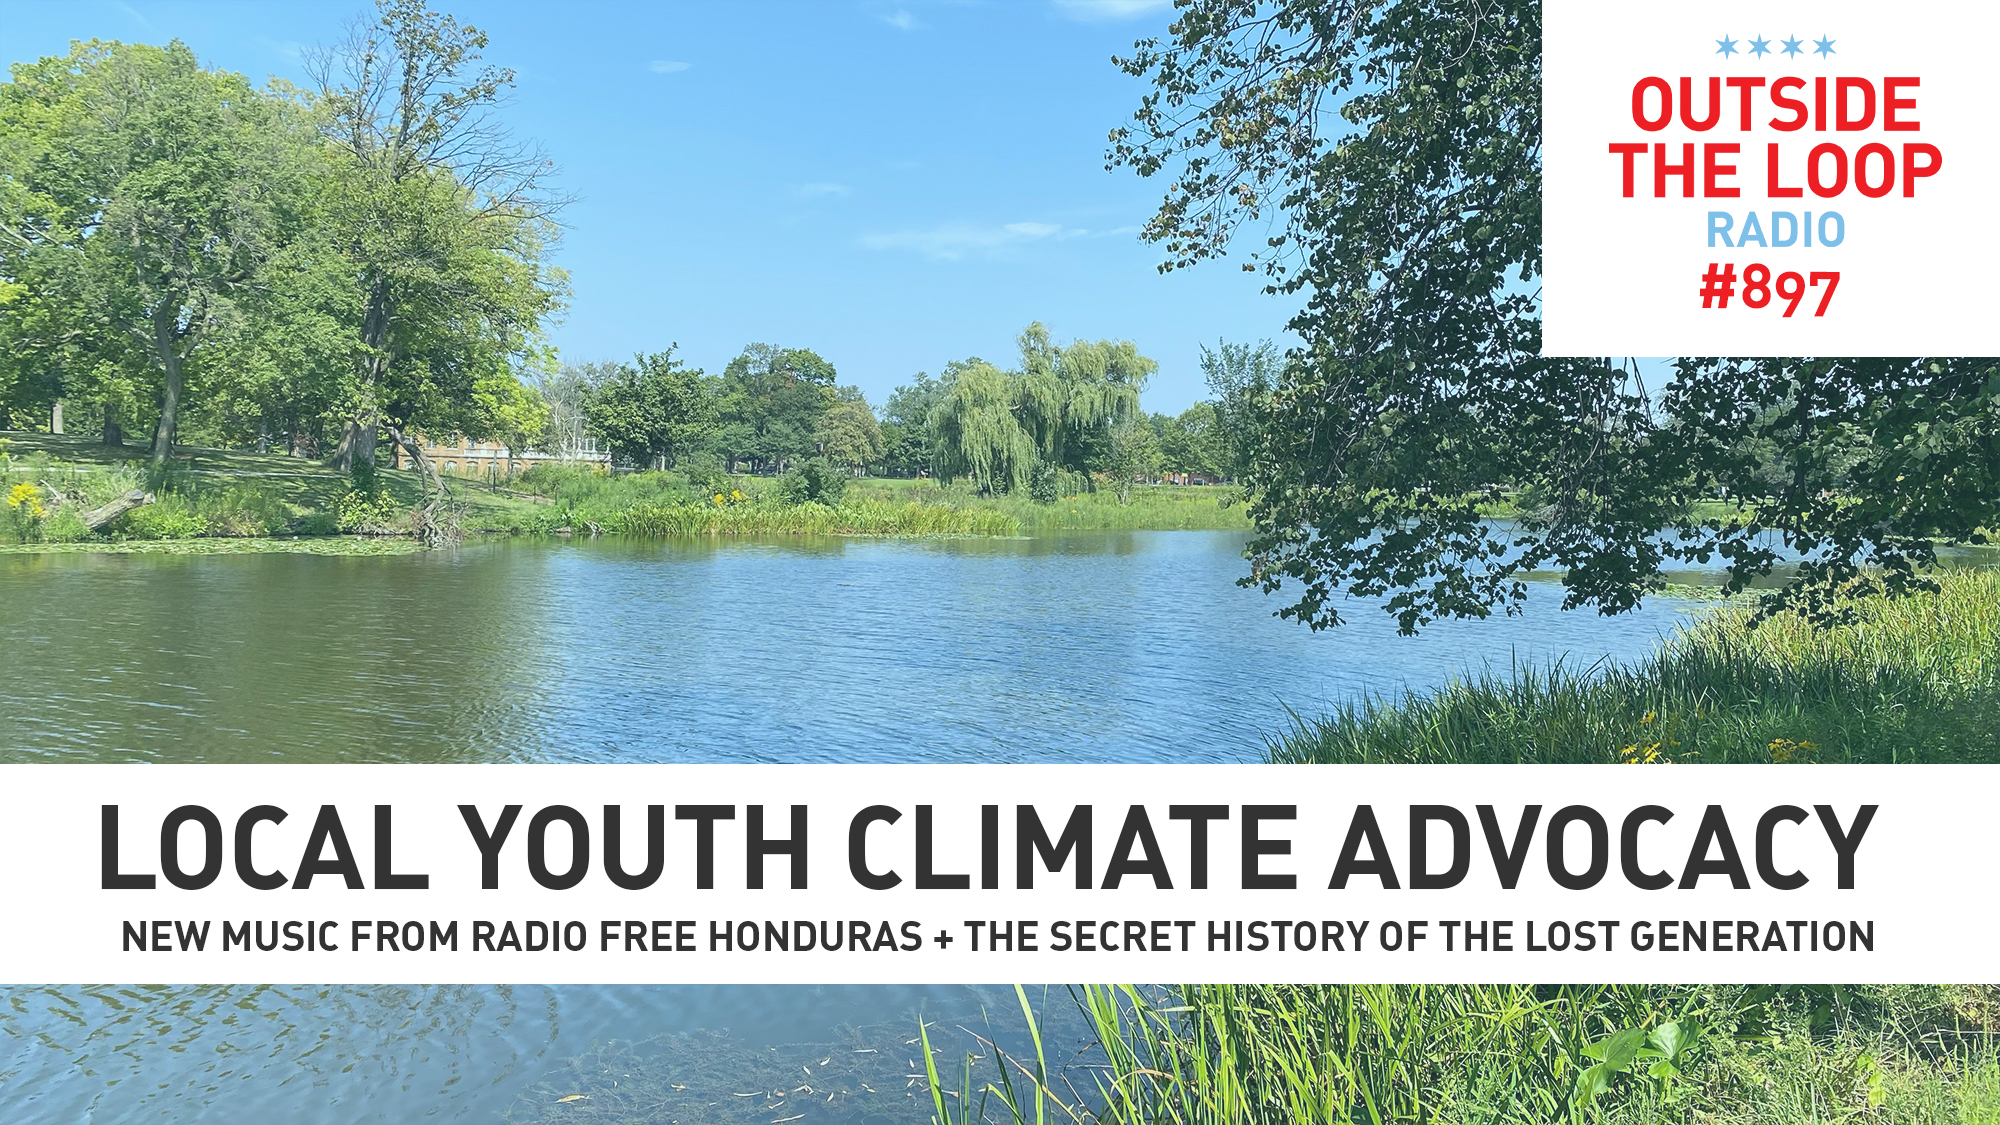 We learn about how local high schoolers are working to fight climate change. (Photo credit: Mike Stephen/WGN Radio)